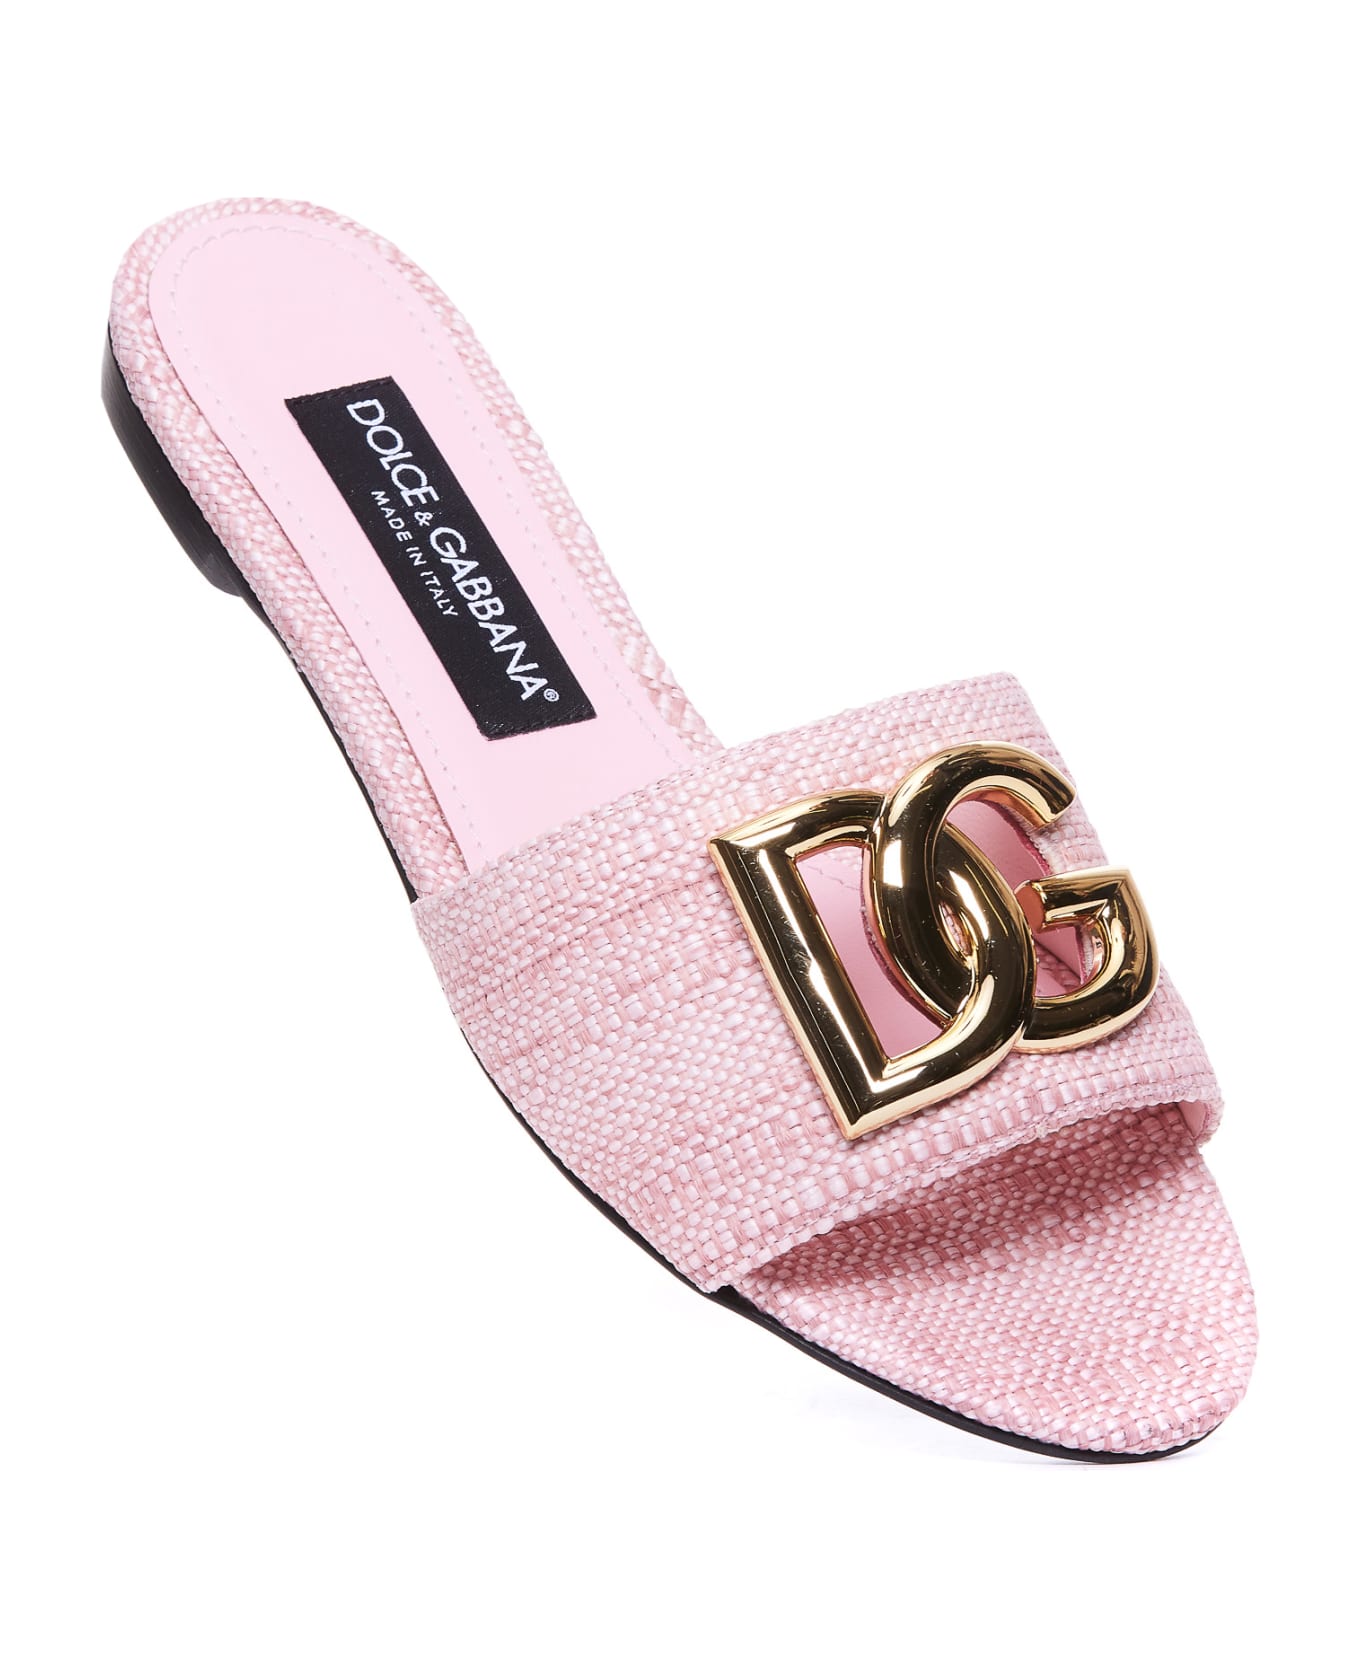 Dolce & Gabbana Pink Fabric Slippers - ROSA BABY2